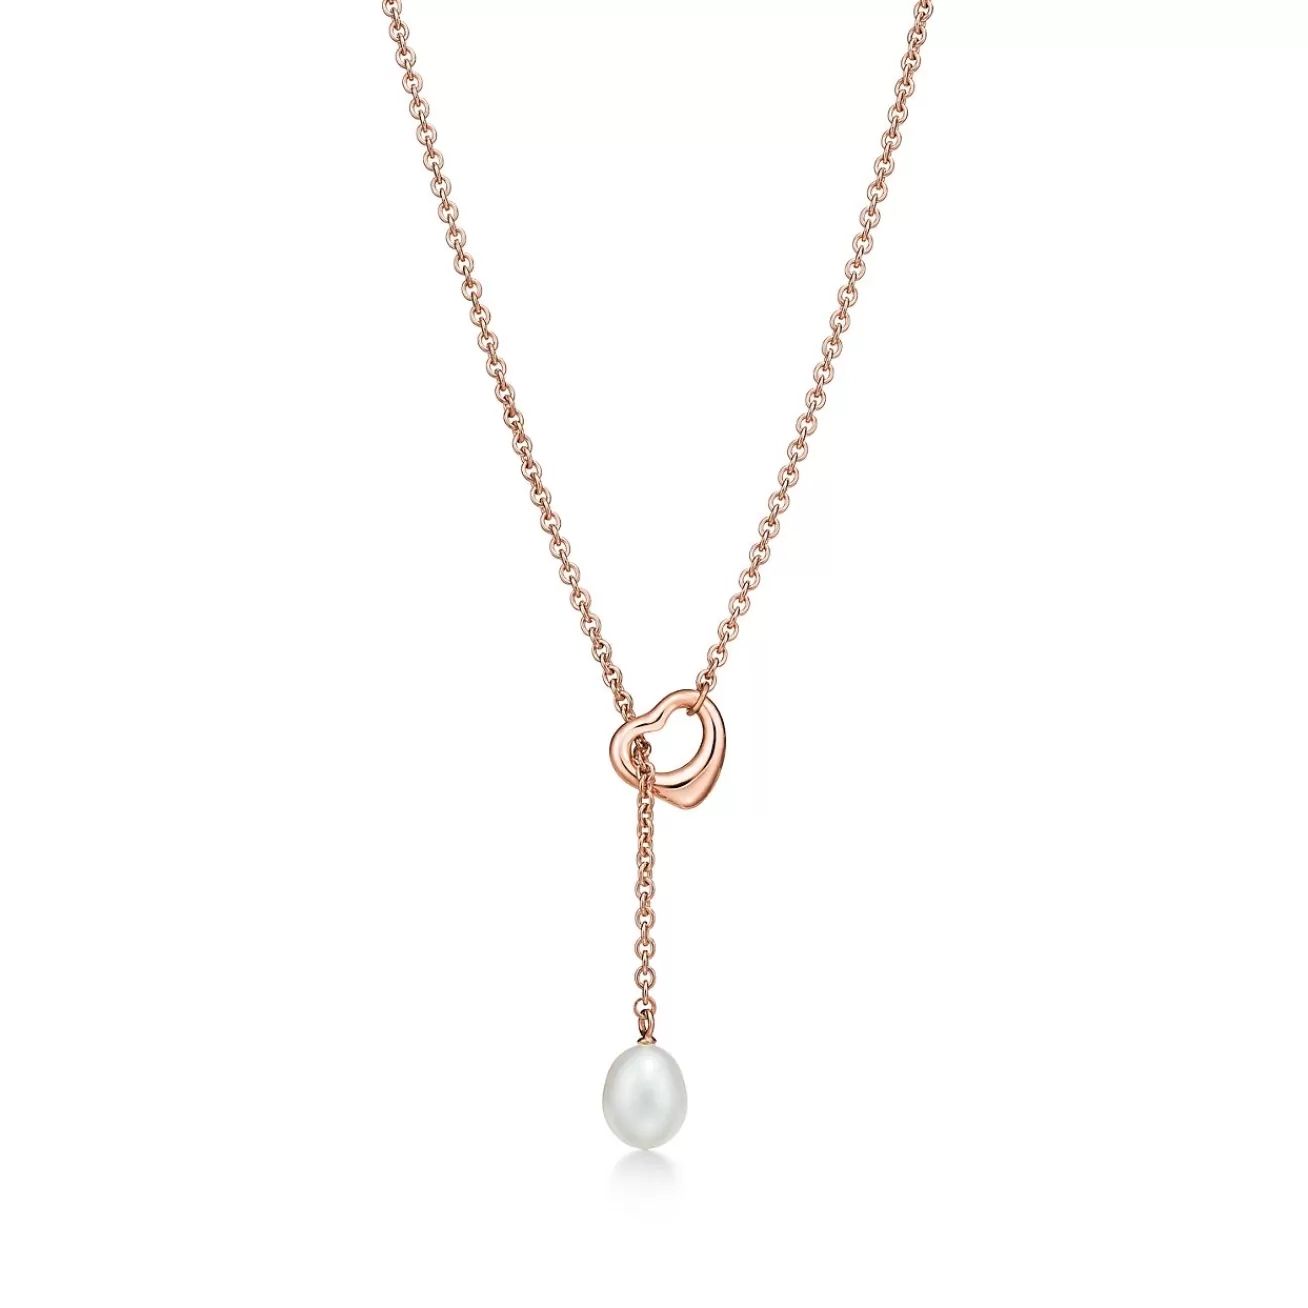 Tiffany & Co. Elsa Peretti® Open Heart lariat in 18k rose gold with a freshwater pearl. | ^ Necklaces & Pendants | Rose Gold Jewelry